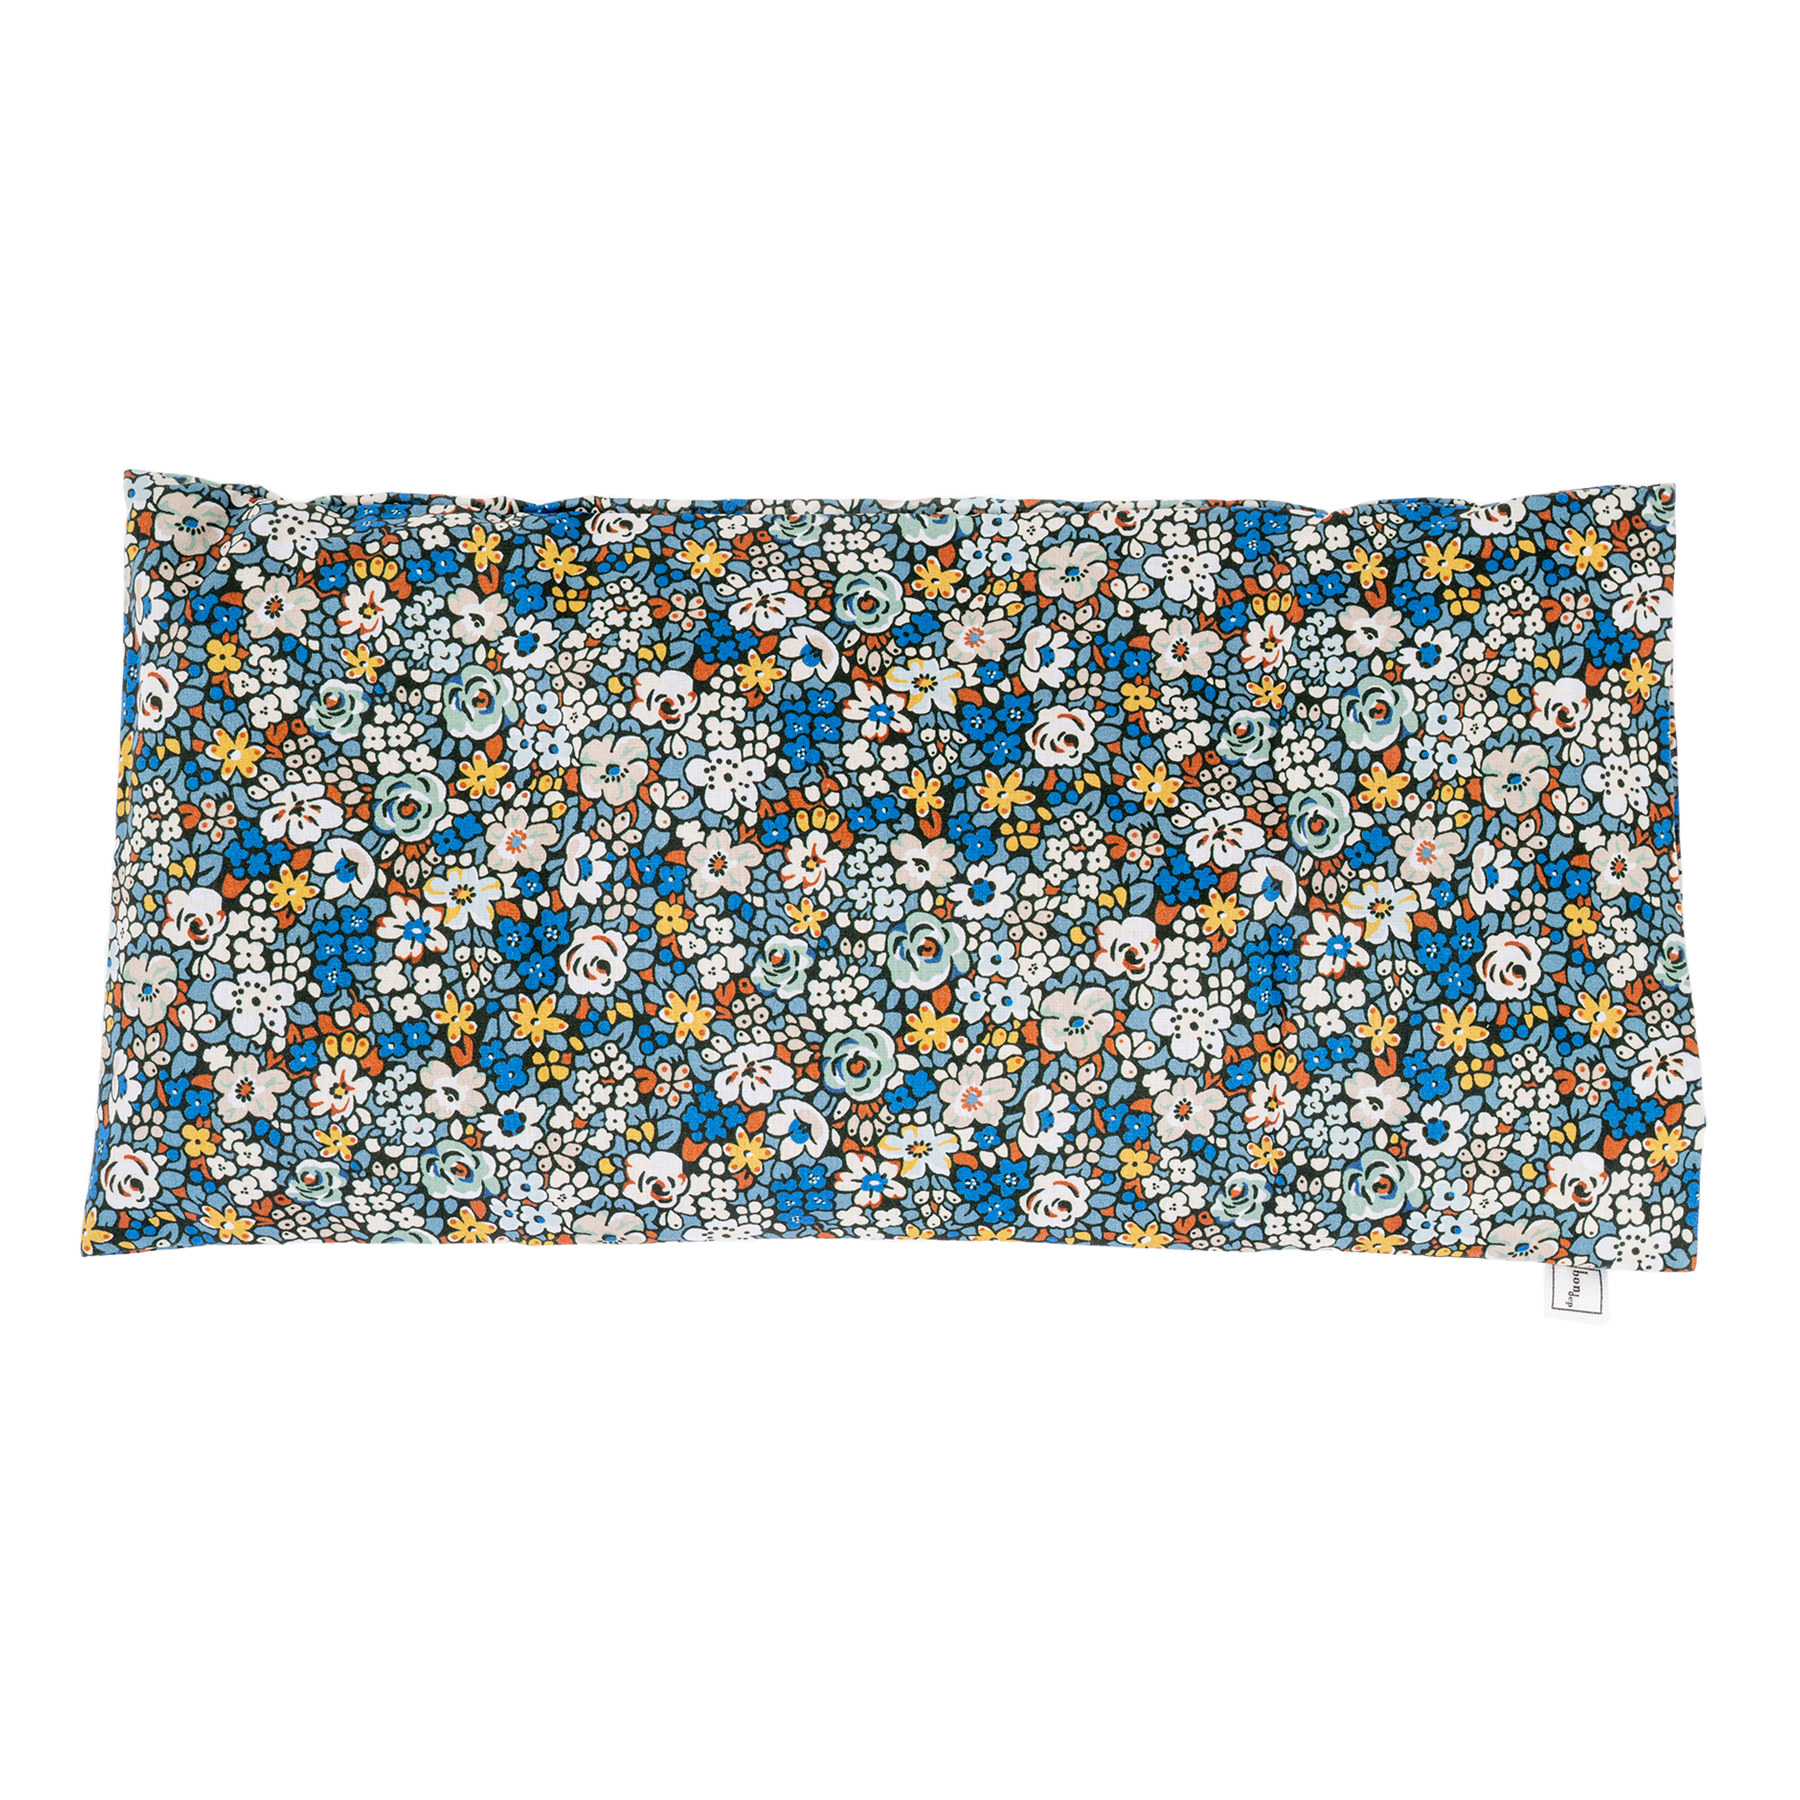 Image of Relaxing Eyepillow mw Liberty Emma Louise from Bon Dep Essentials